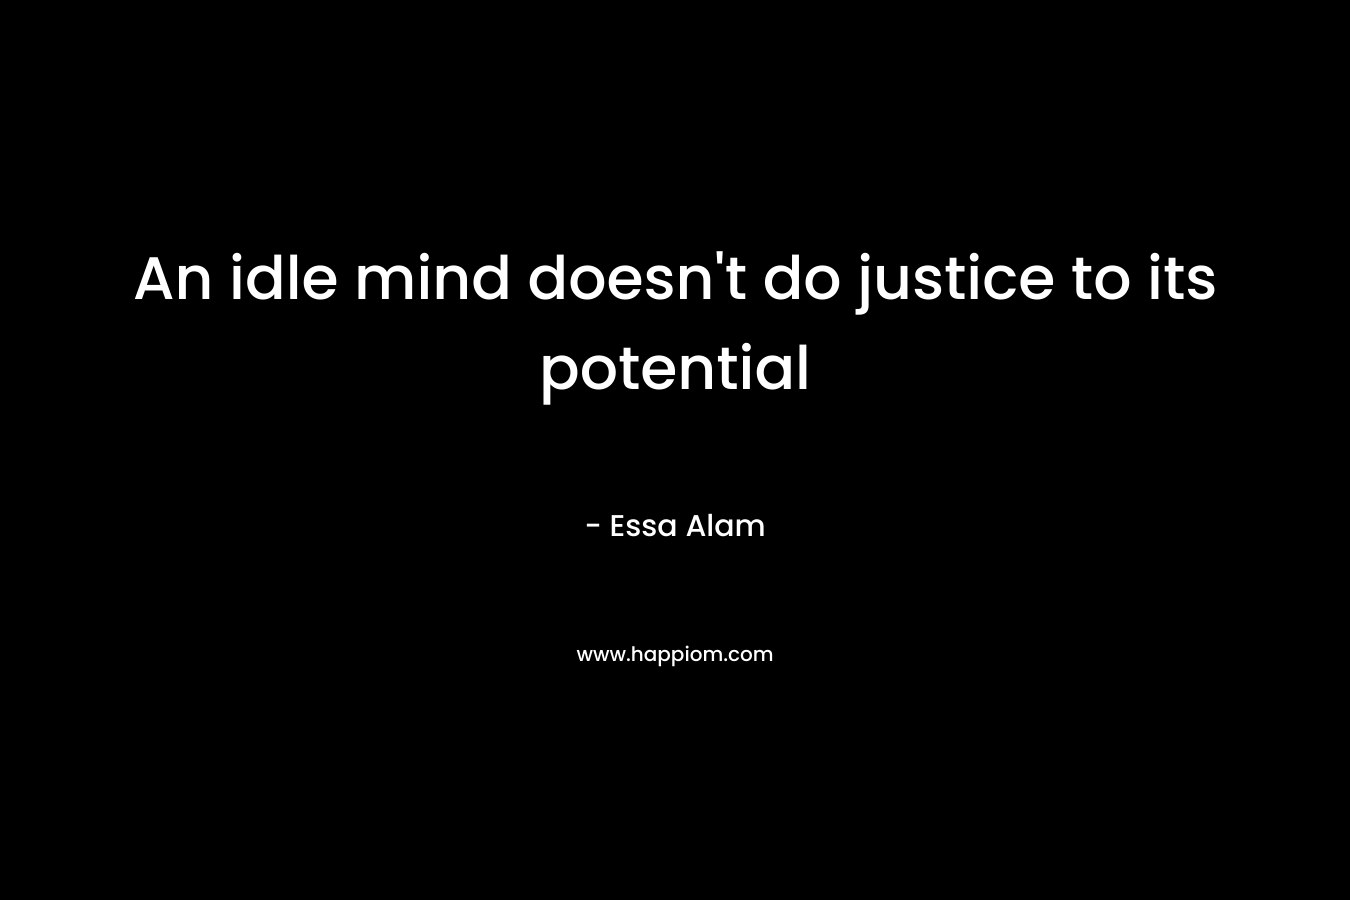 An idle mind doesn't do justice to its potential